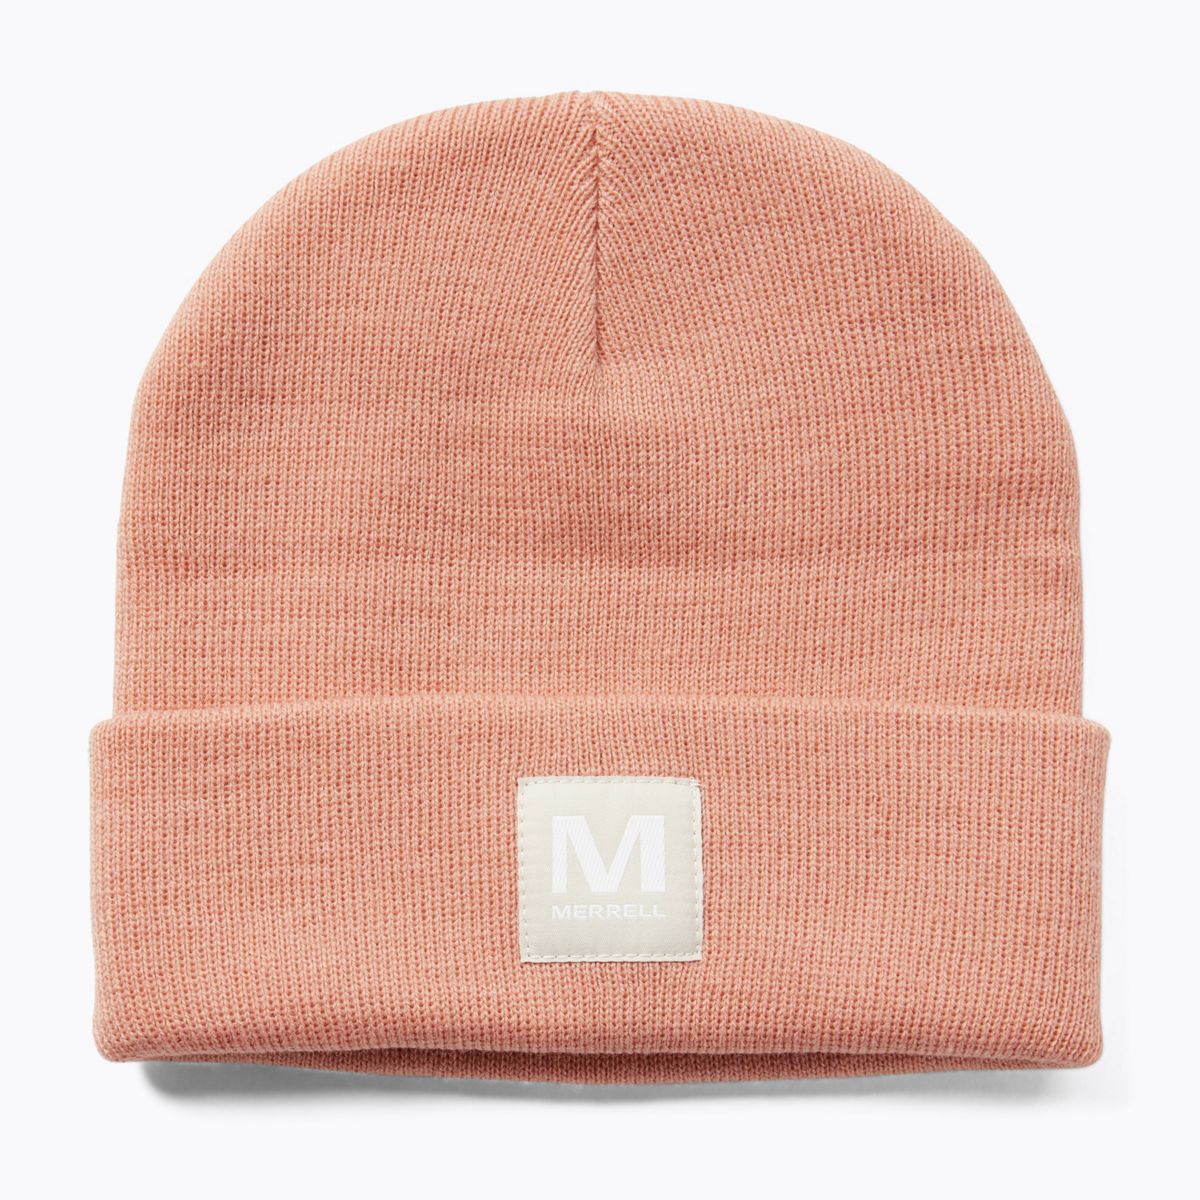 Kid's Merrell Patch Beanie, Muted Clay, dynamic